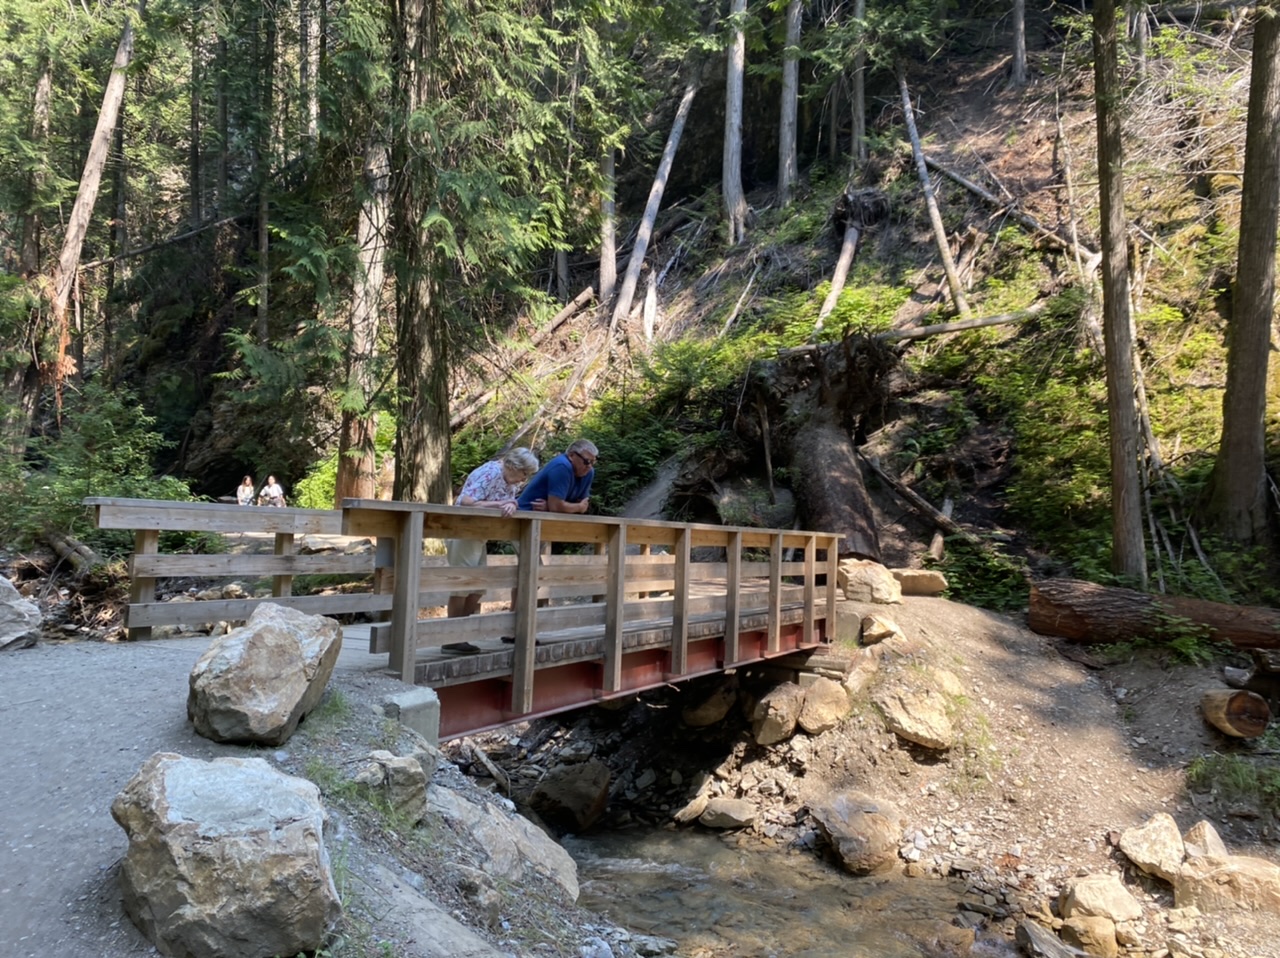 Margaret Falls in Herald Provincial Park: Visit Margaret Falls in Herald Provincial Park, a spectacular site not to be missed. The lower loop is a self-guided nature walk through old growth forest, finishing on the viewing […]